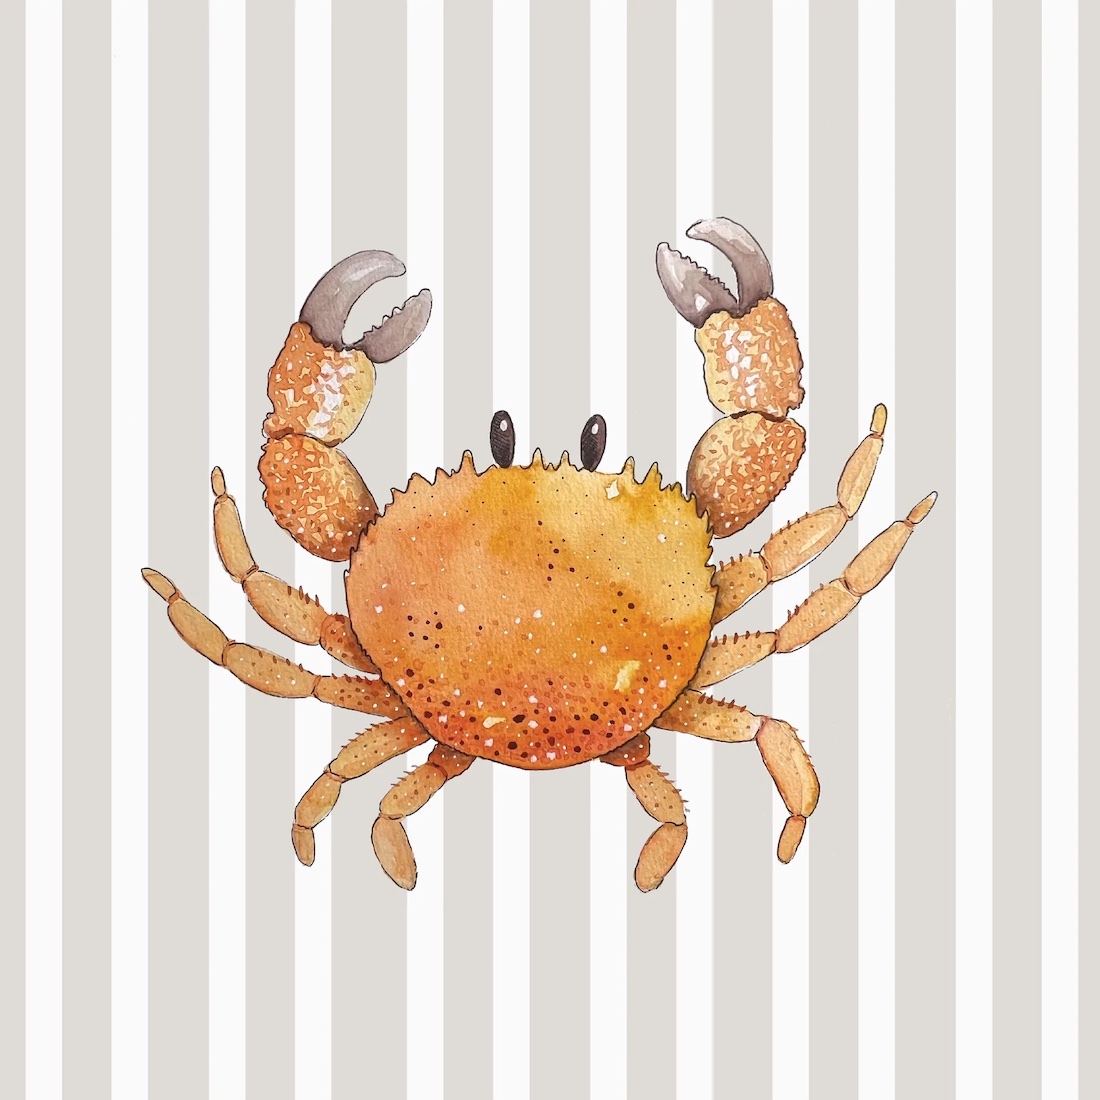 Hand drawn crab on striped background